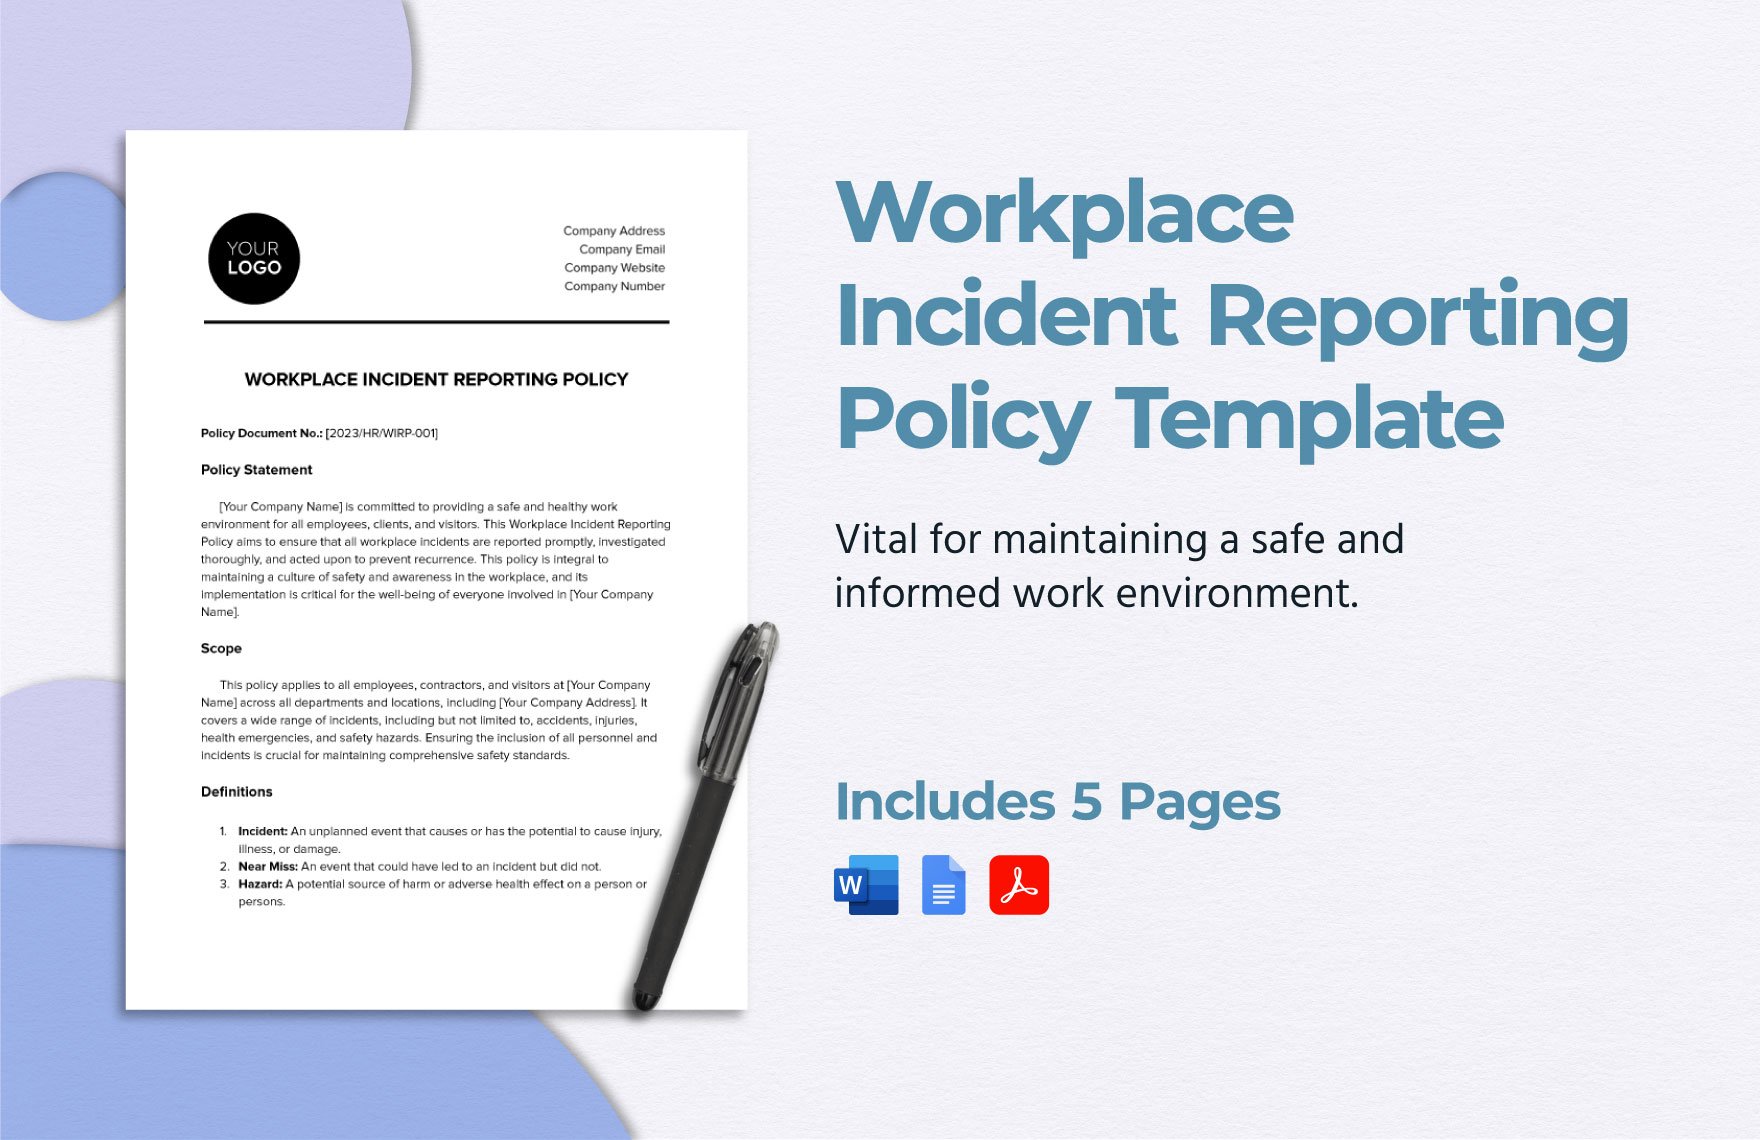 Workplace Incident Reporting Policy Template